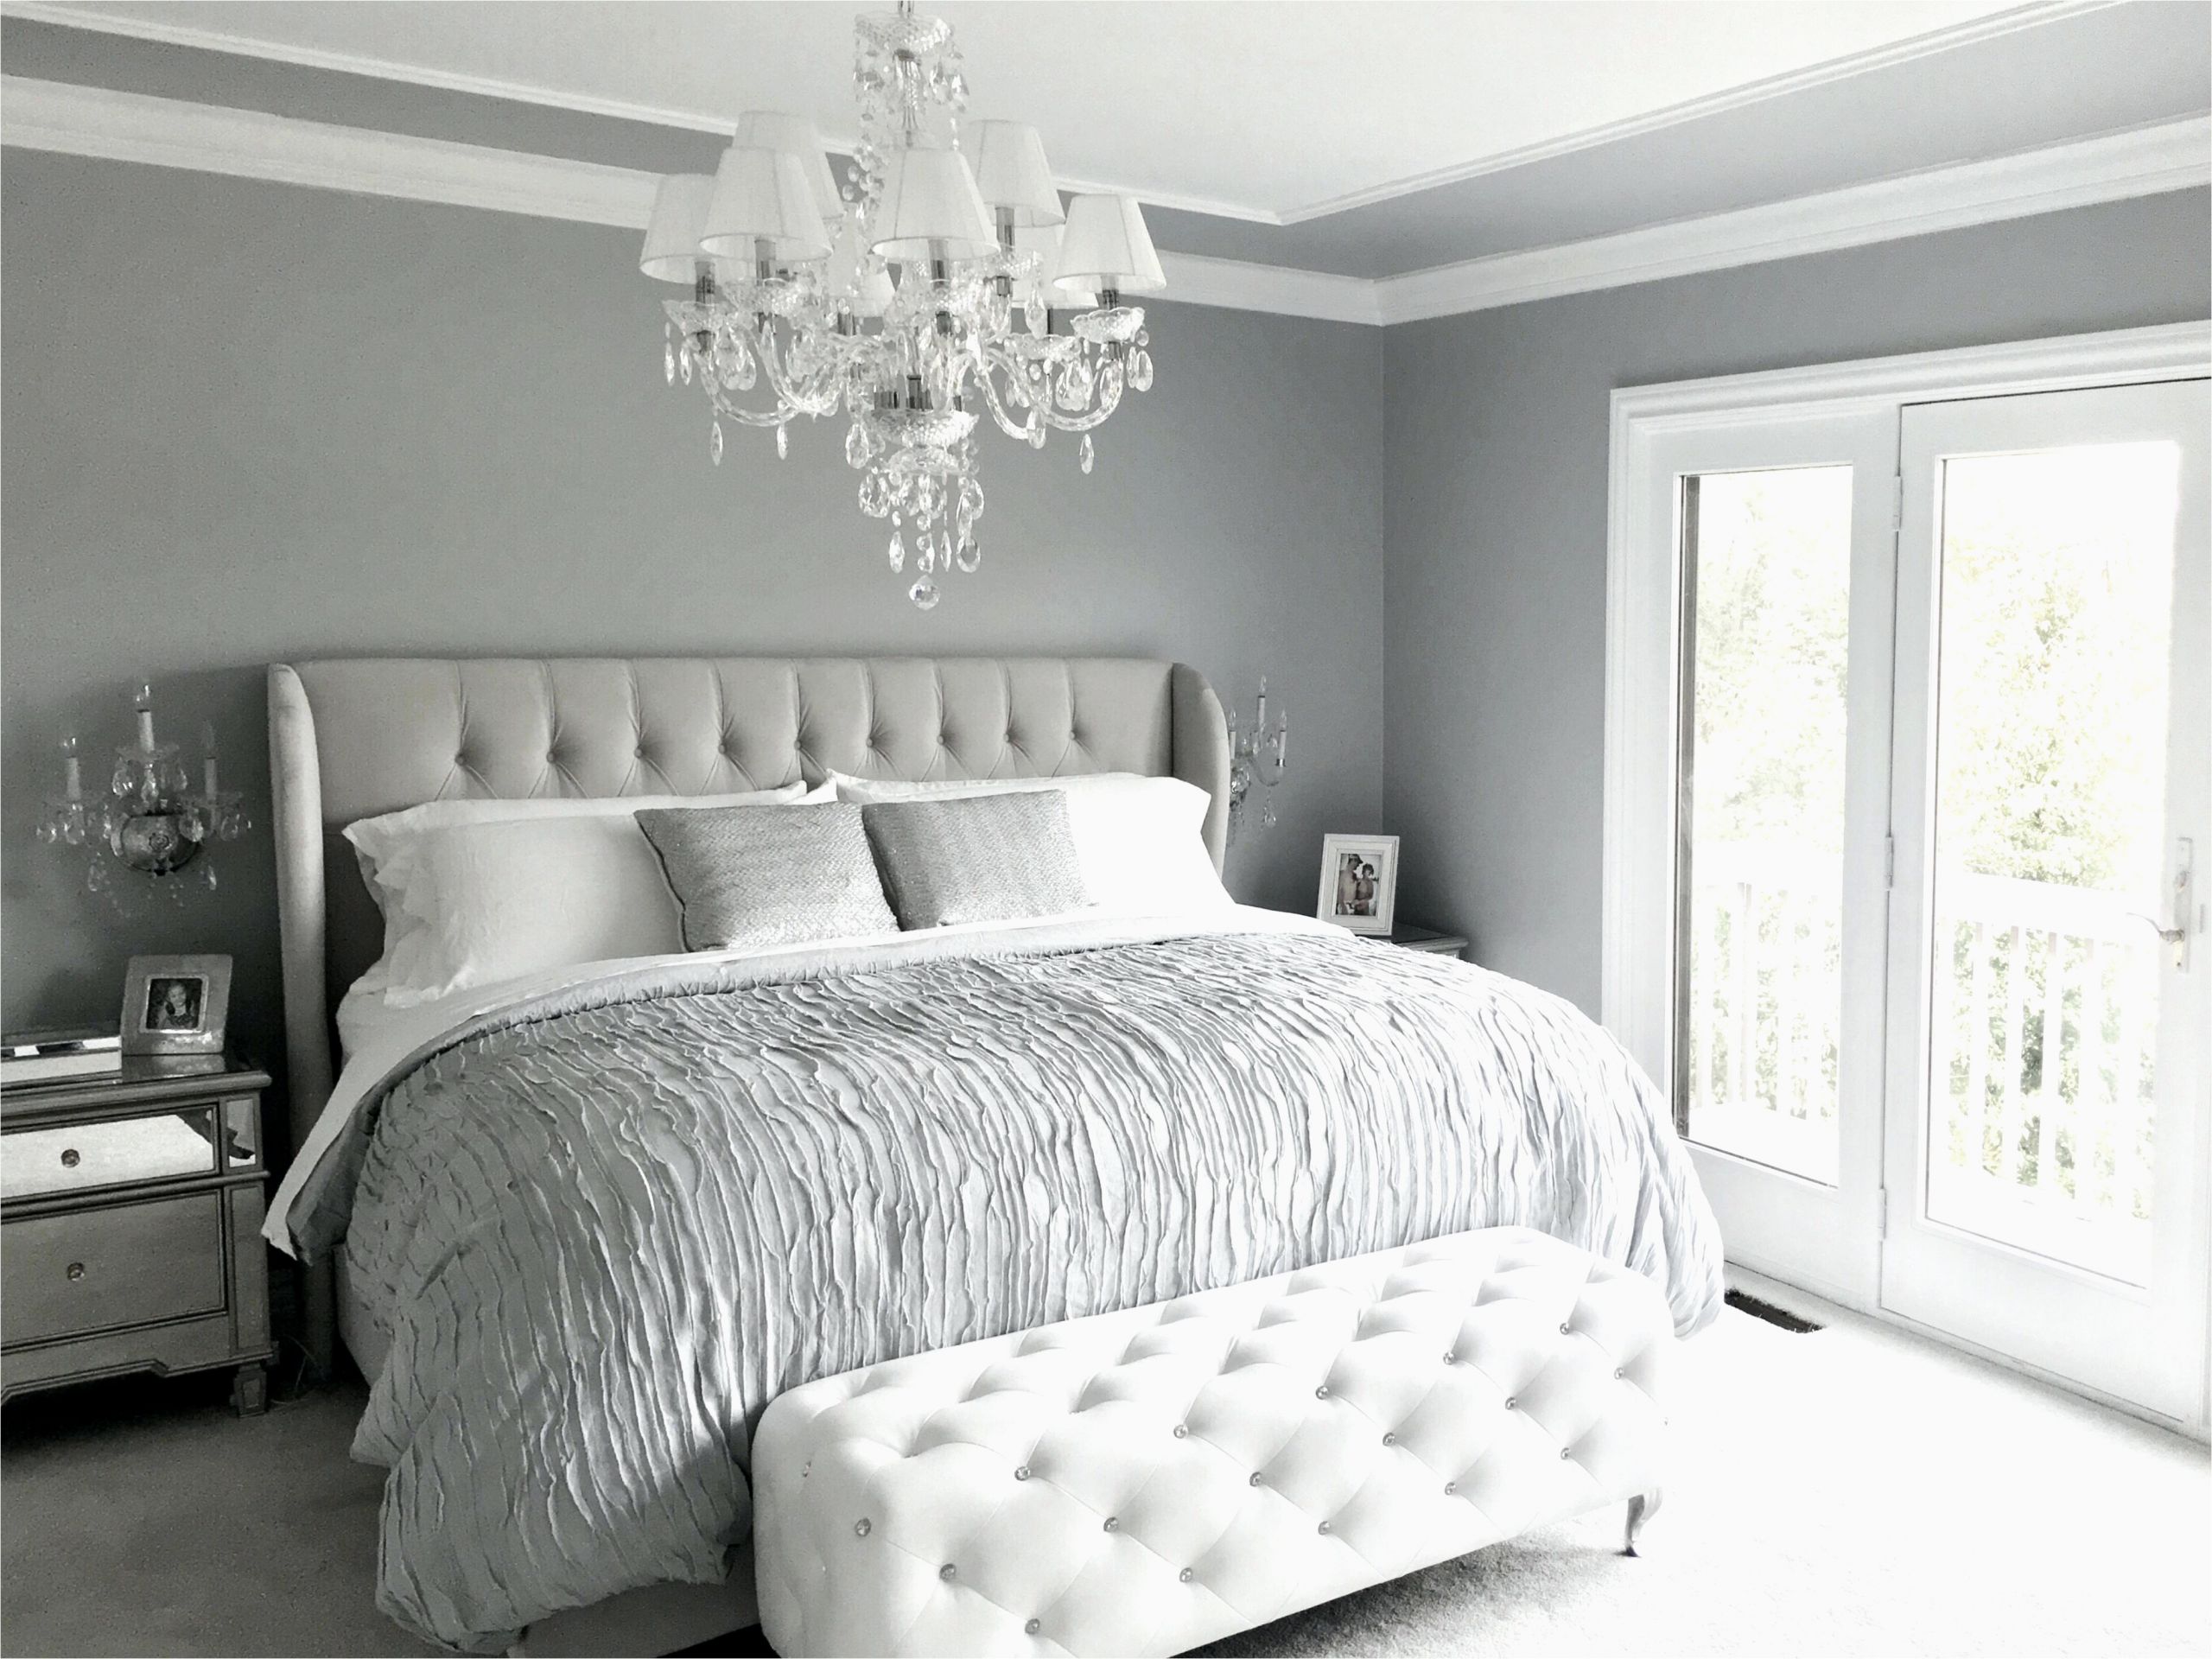 Bedroom Gray Walls
 Gray decoration for bedrooms How to look elegant and warm